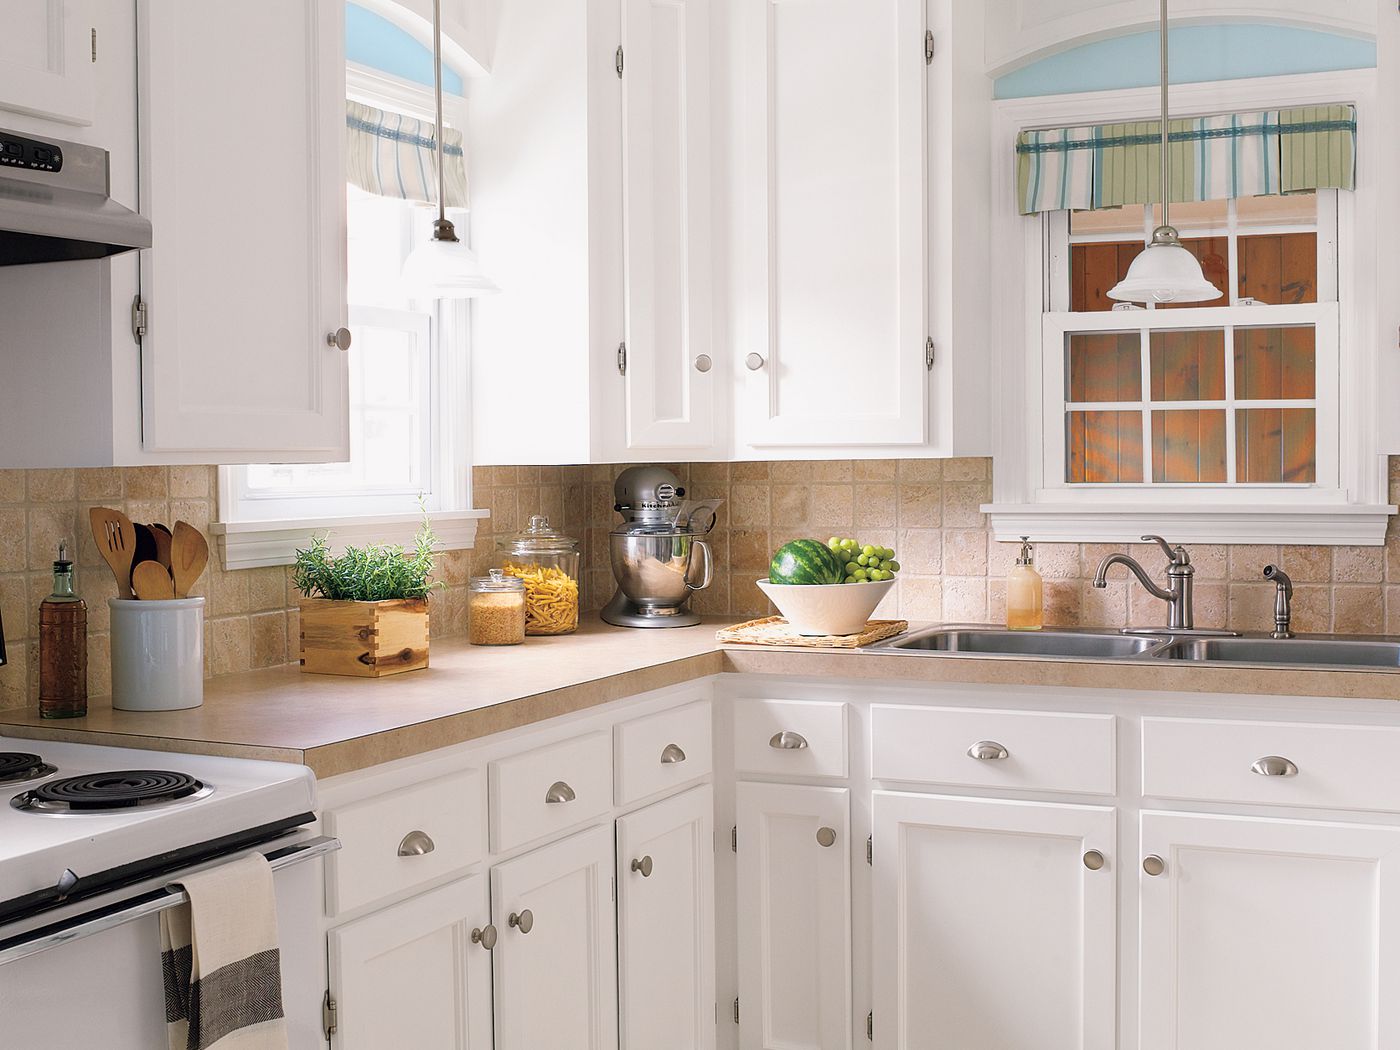 Top 20 Budget Kitchen and Bath Remodels   This Old House